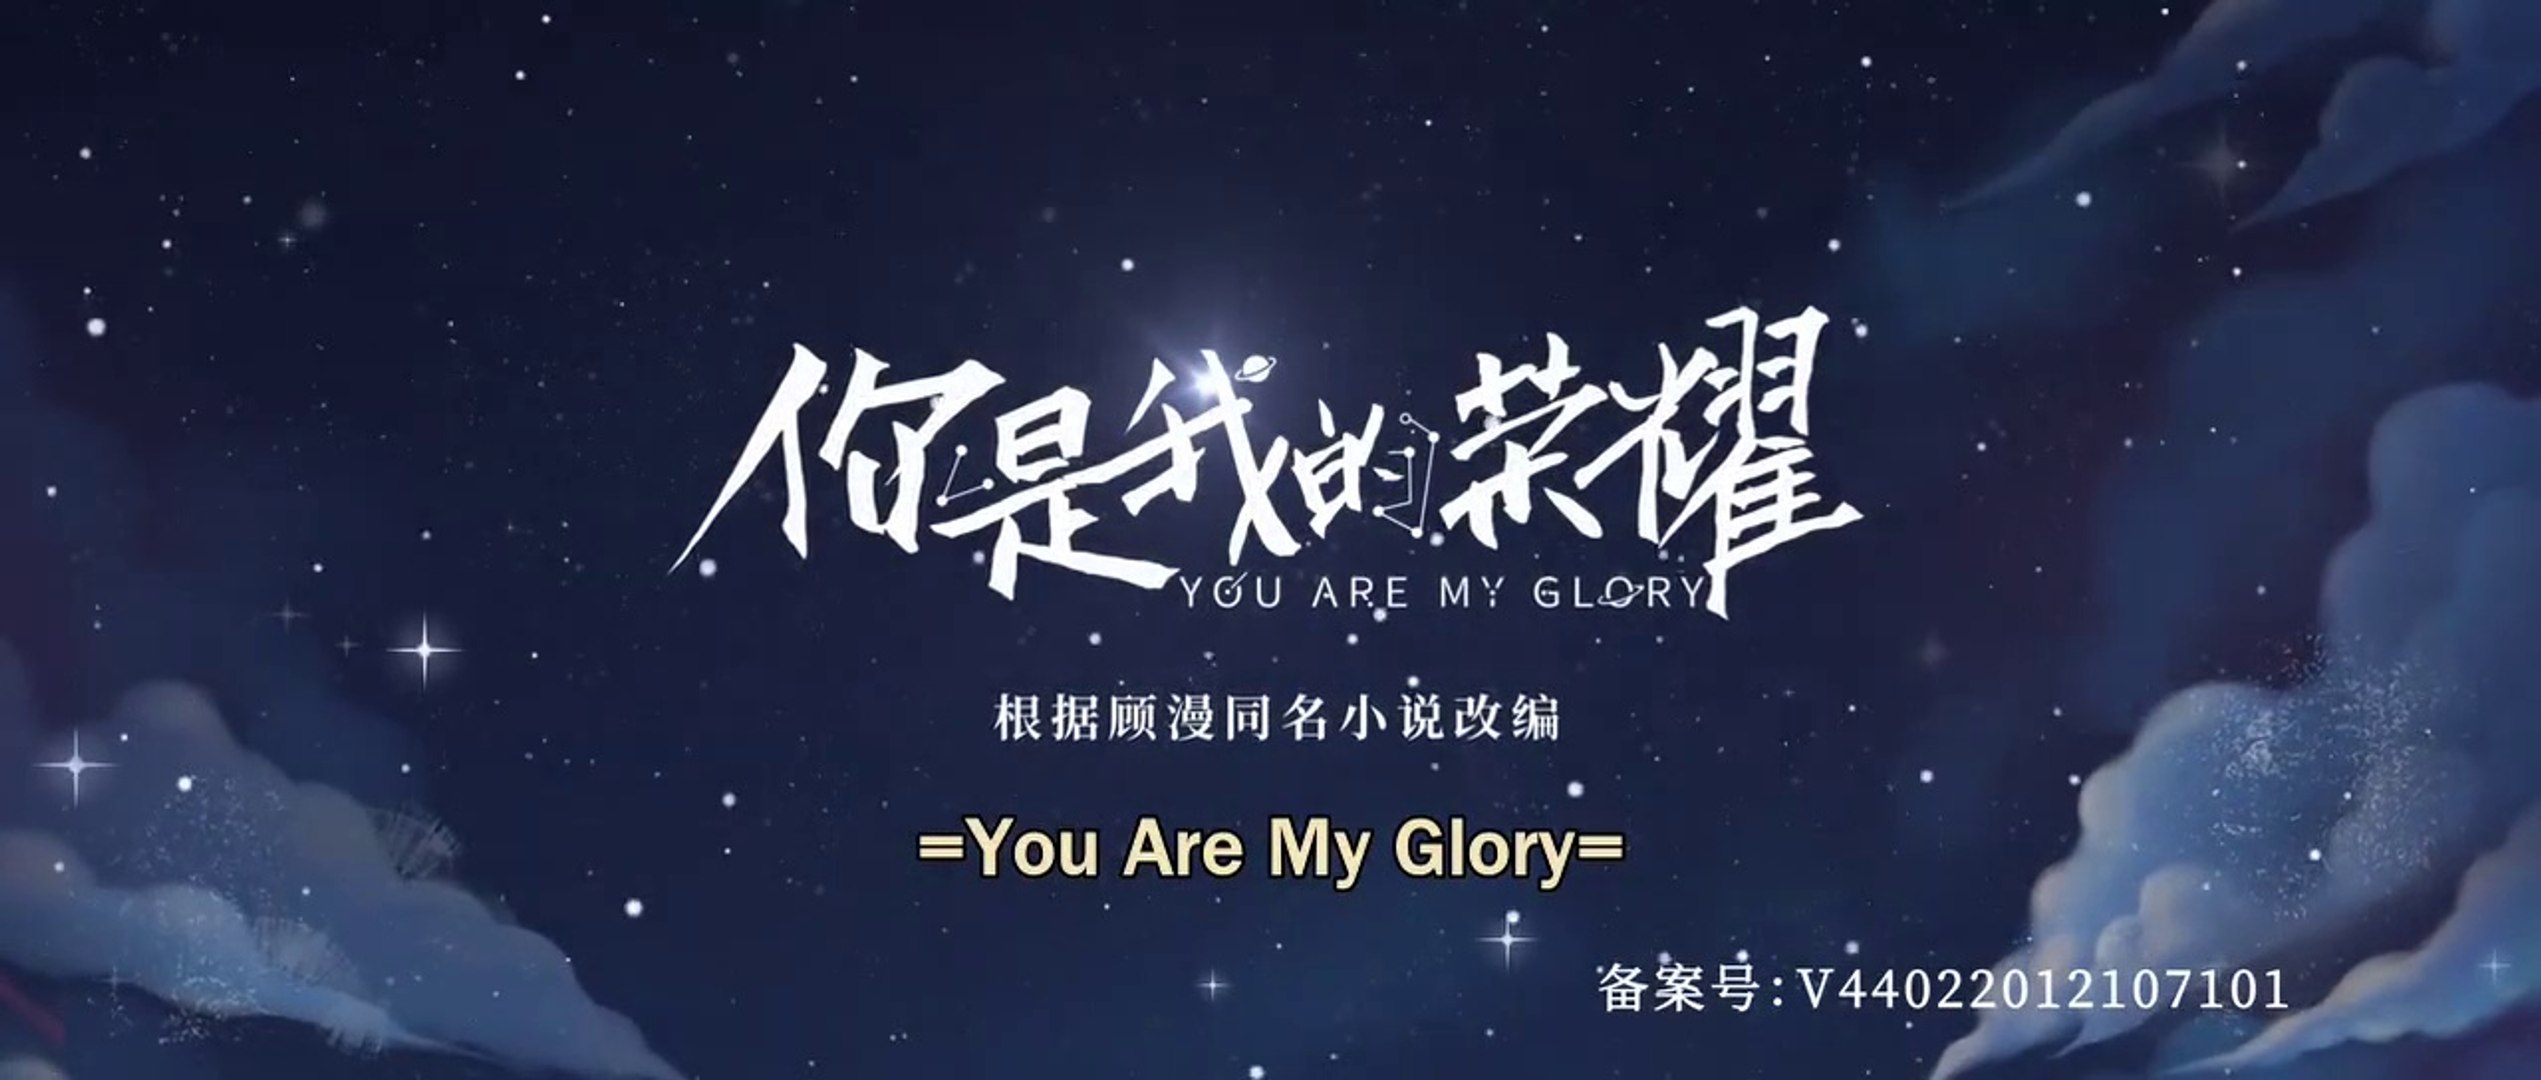 You are my glory ep 13 eng sub